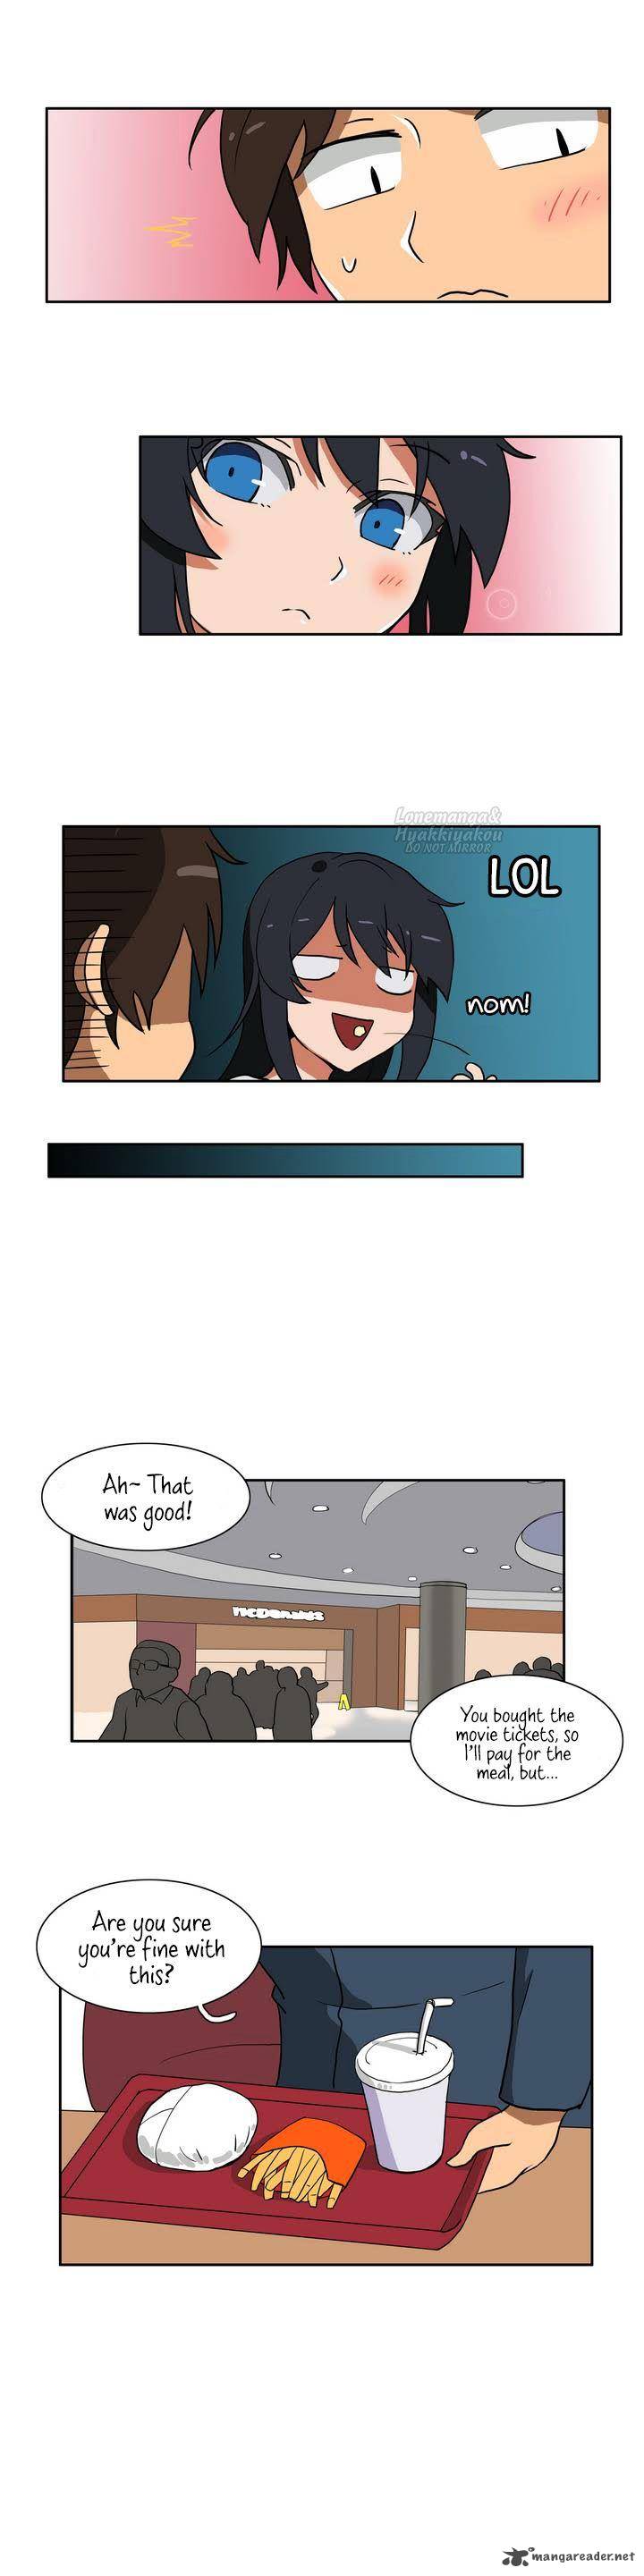 Hero Waltz Chapter 5 Page 7